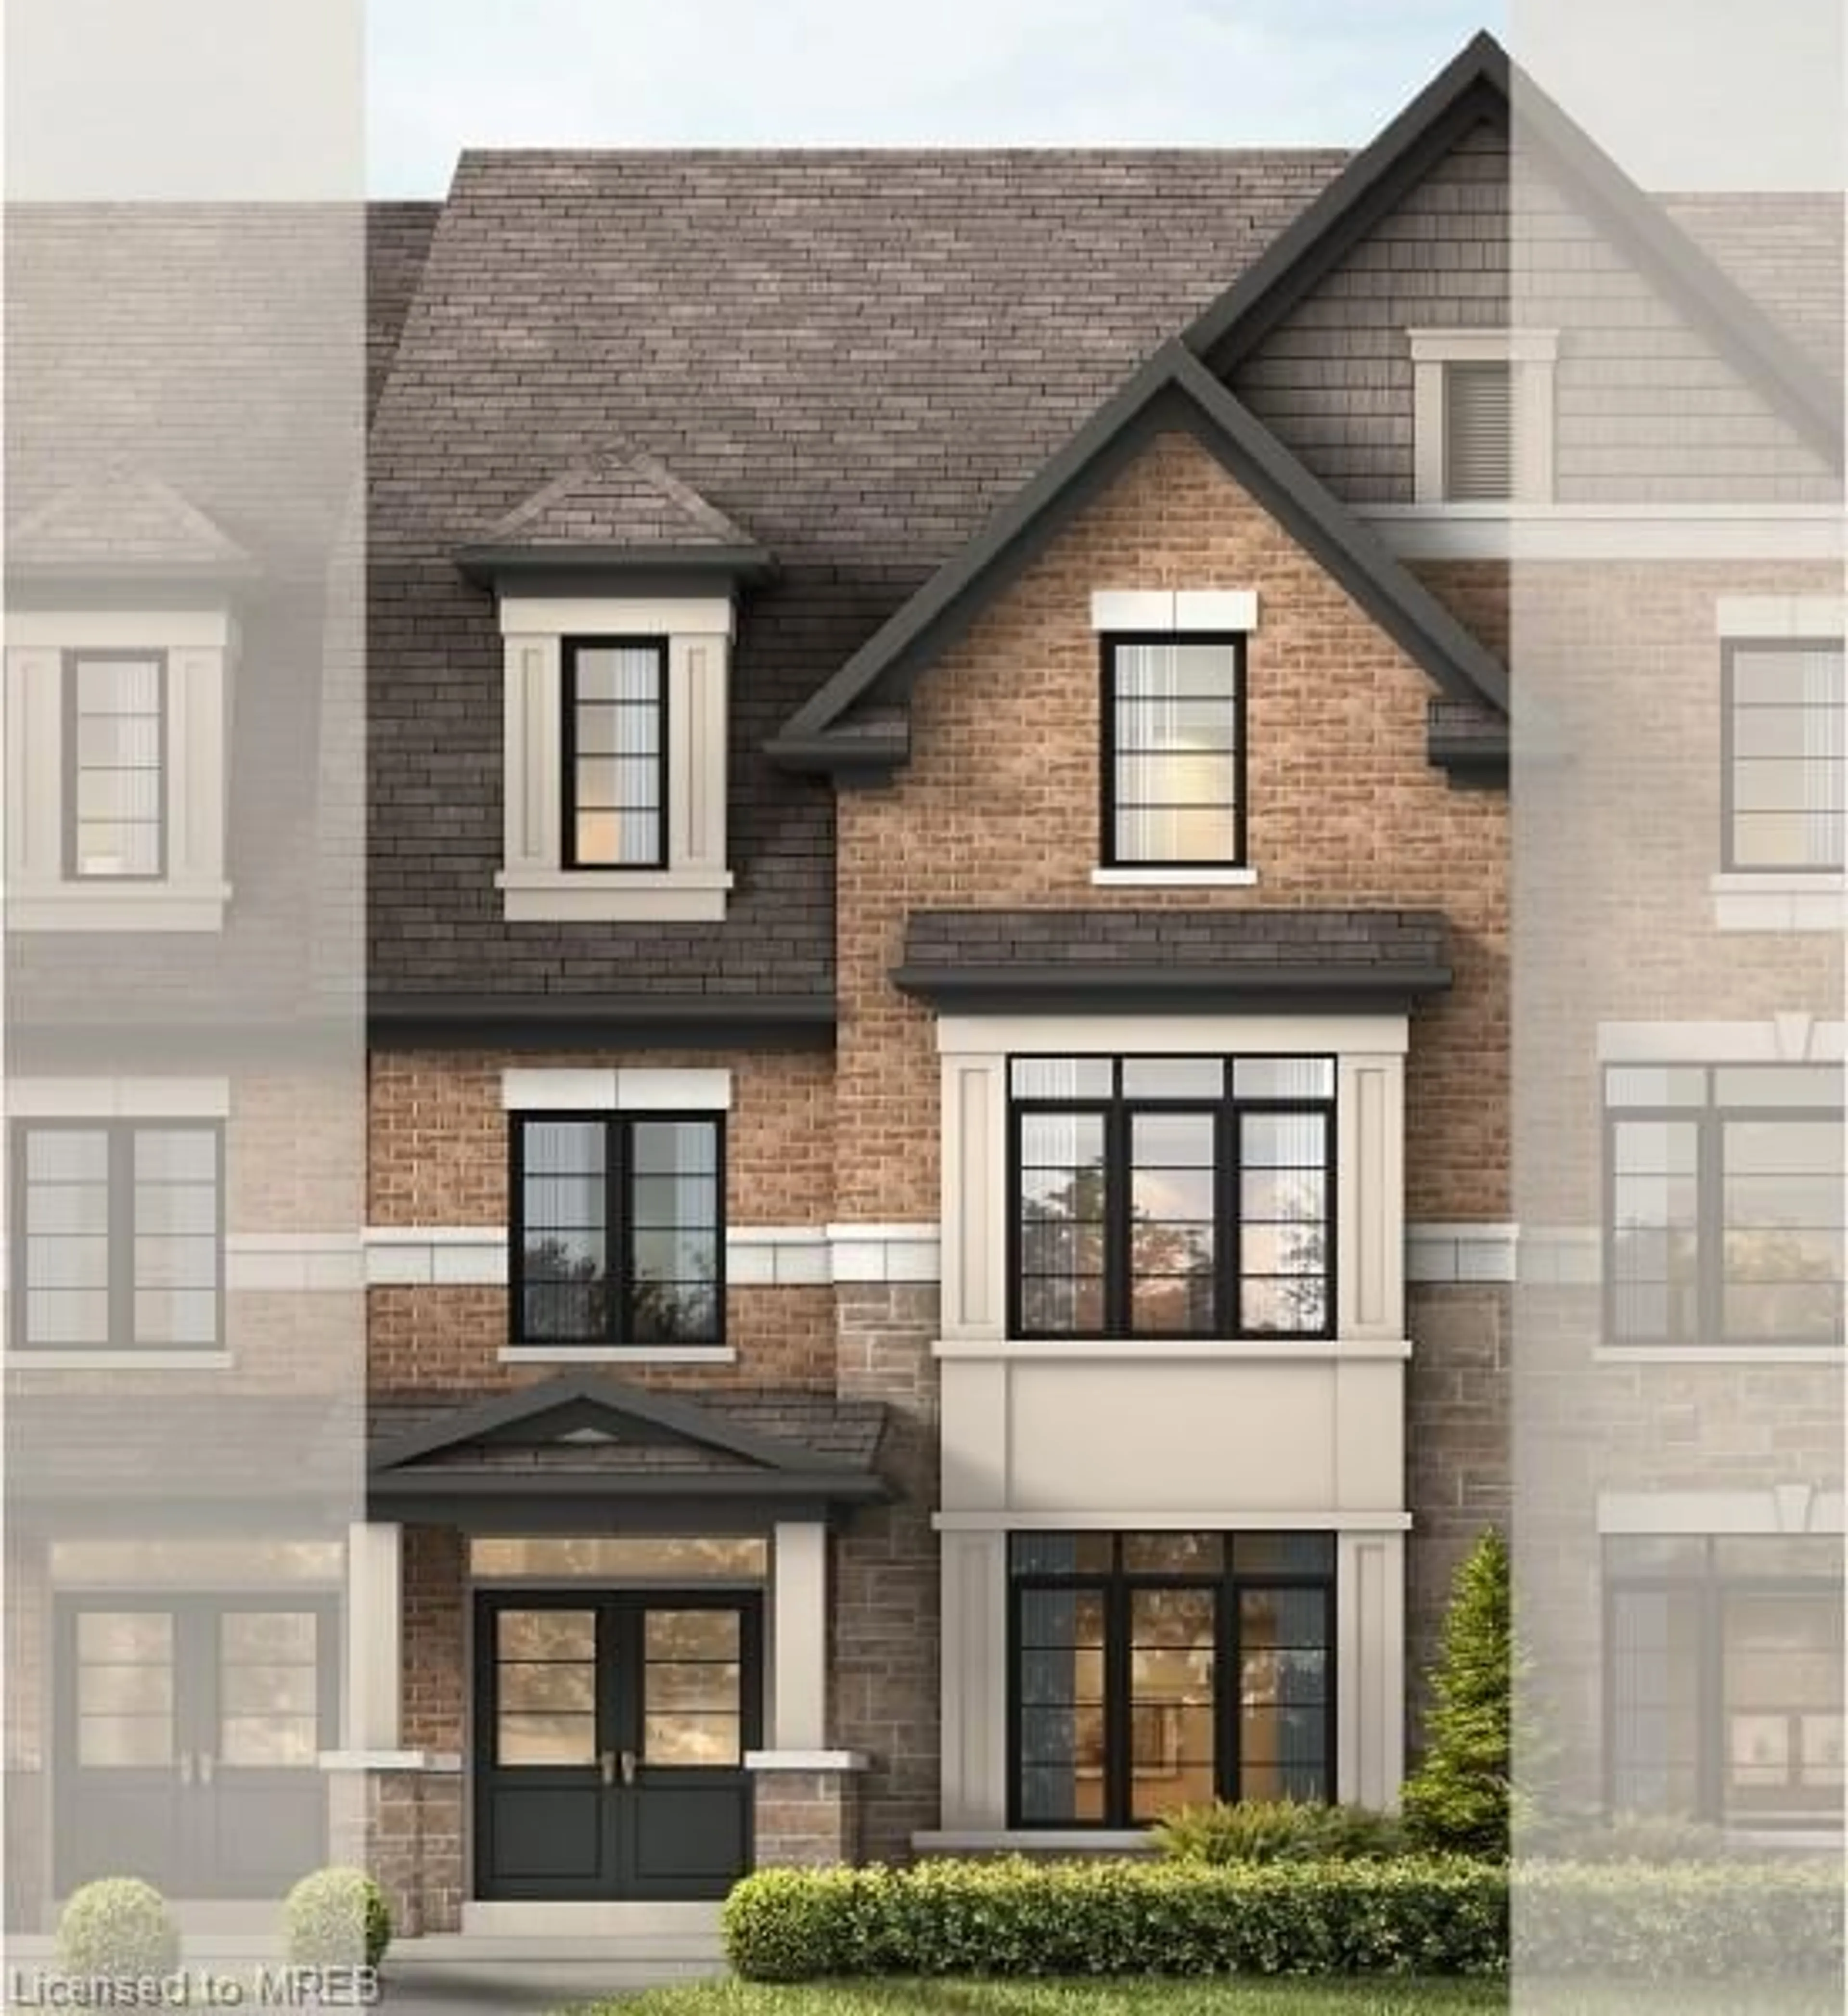 Home with brick exterior material for 84 Coolhurst Ave, Brampton Ontario L7A 0B8